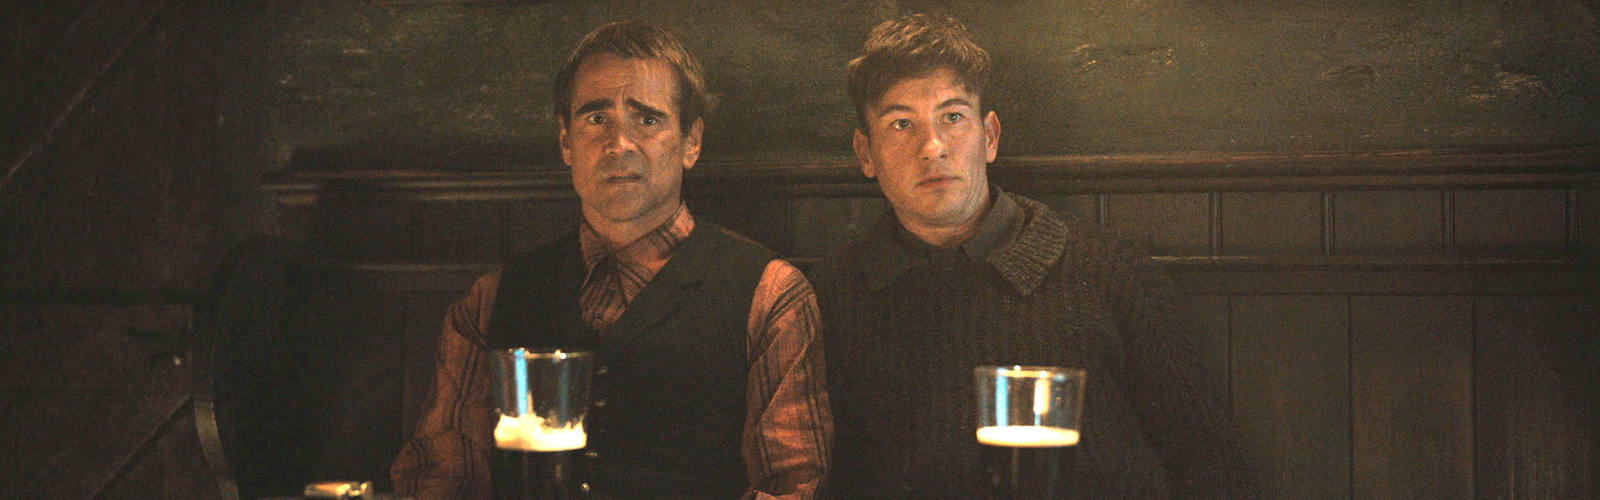 Colin Farrell and Barry Keoghan in Banshees of Inisherin